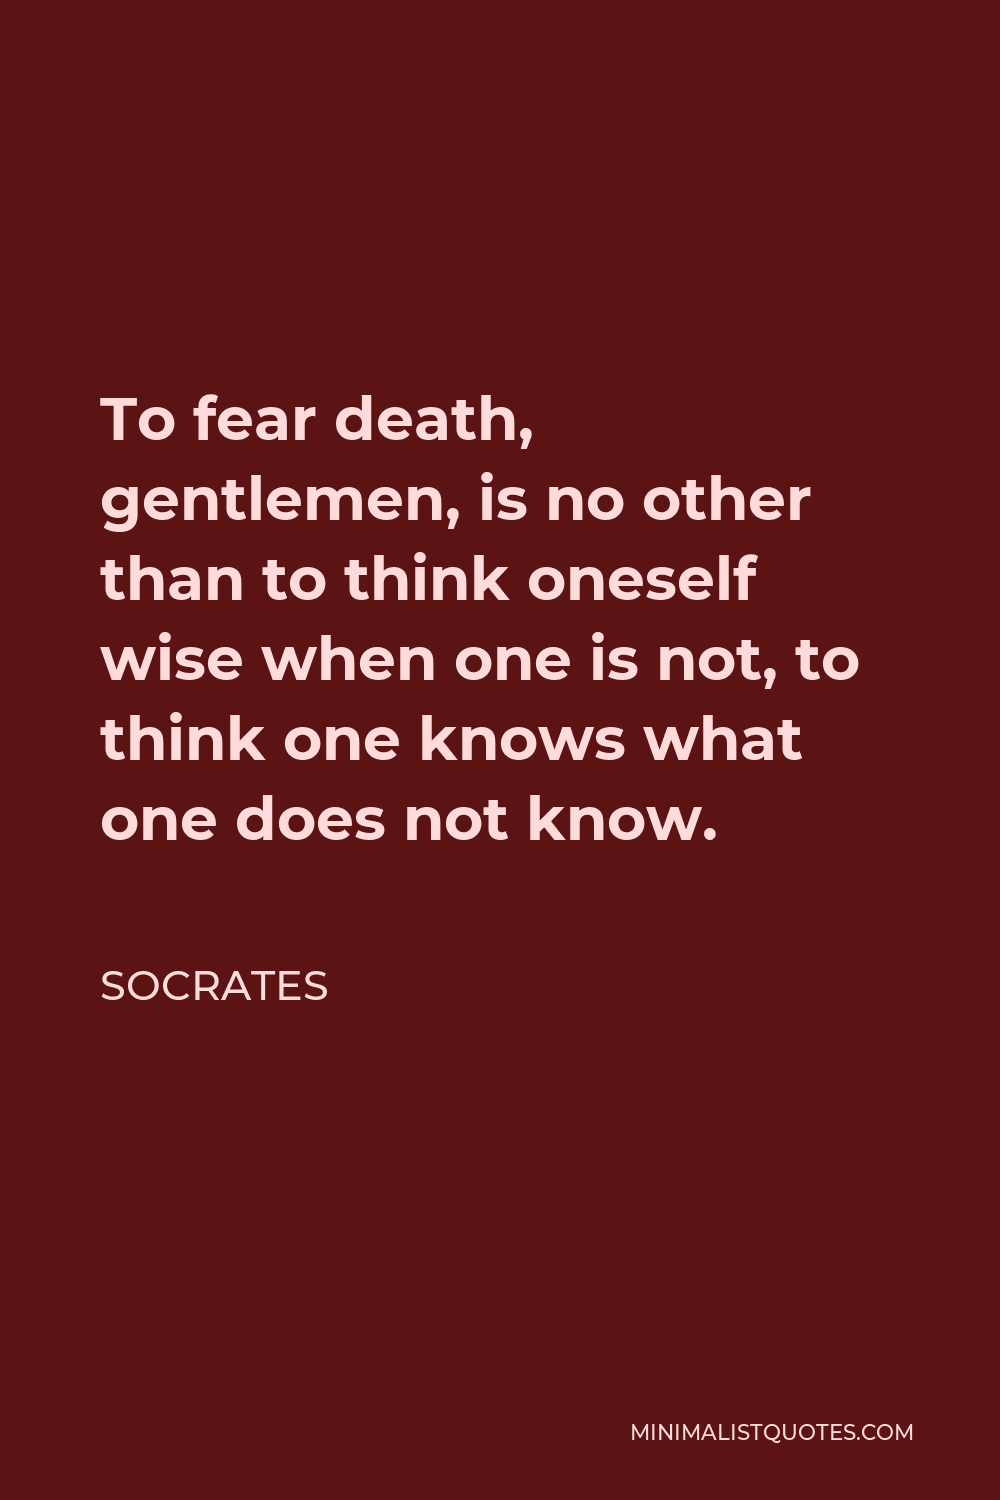 Socrates Quote - To fear death, gentlemen, is no other than to think oneself wise when one is not, to think one knows what one does not know.